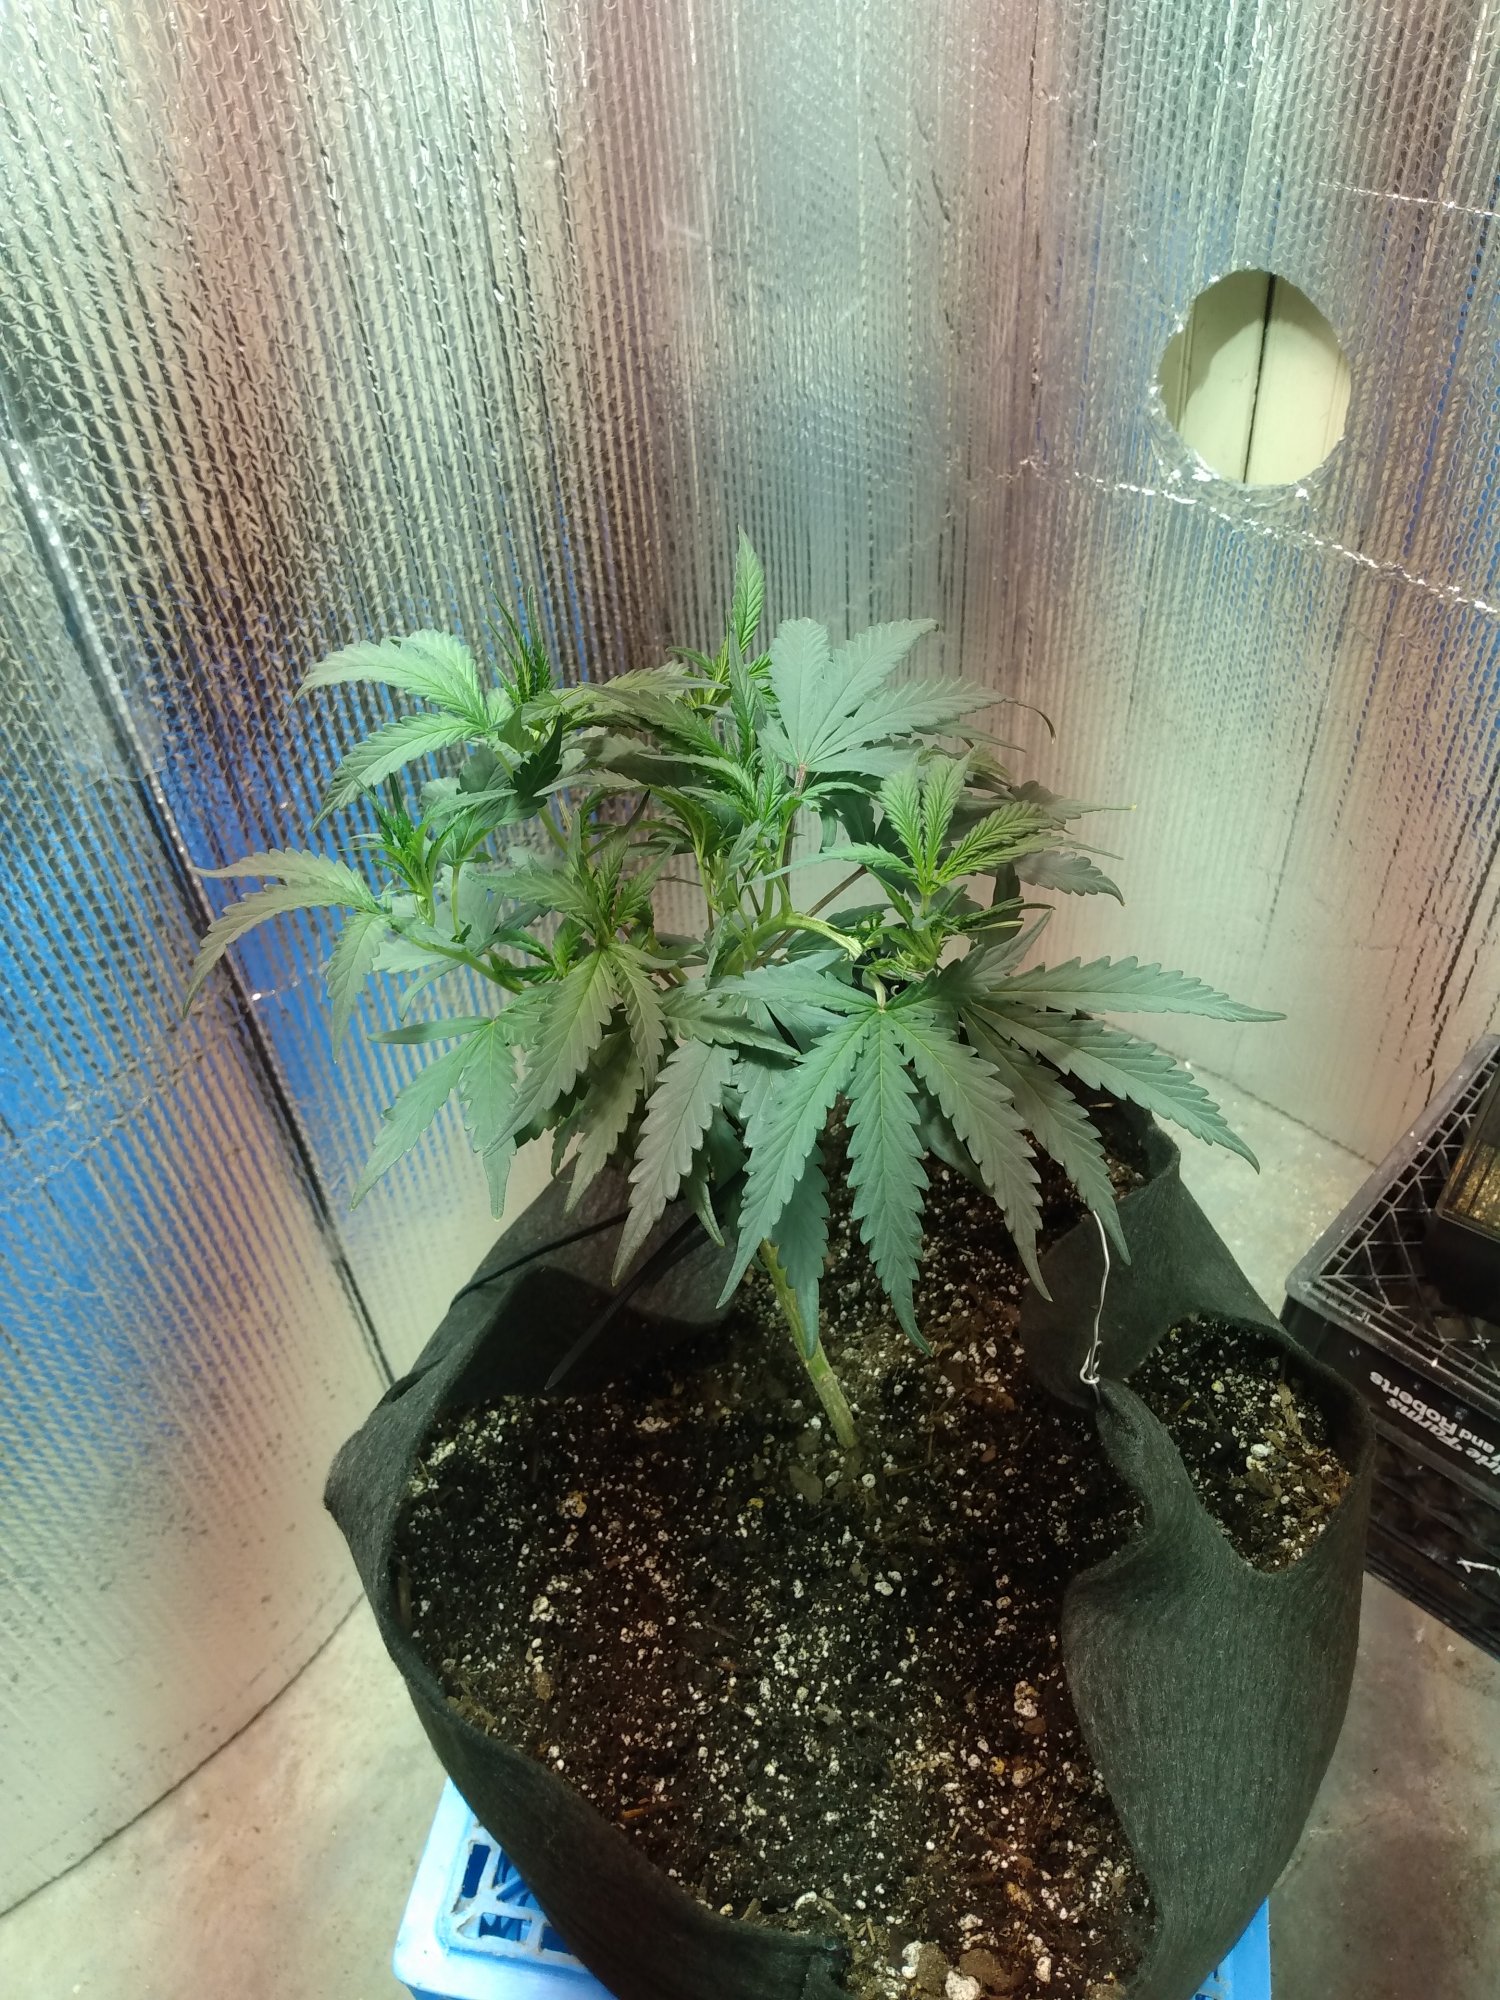 A few basic questions about growing i prefer you guys answer 2